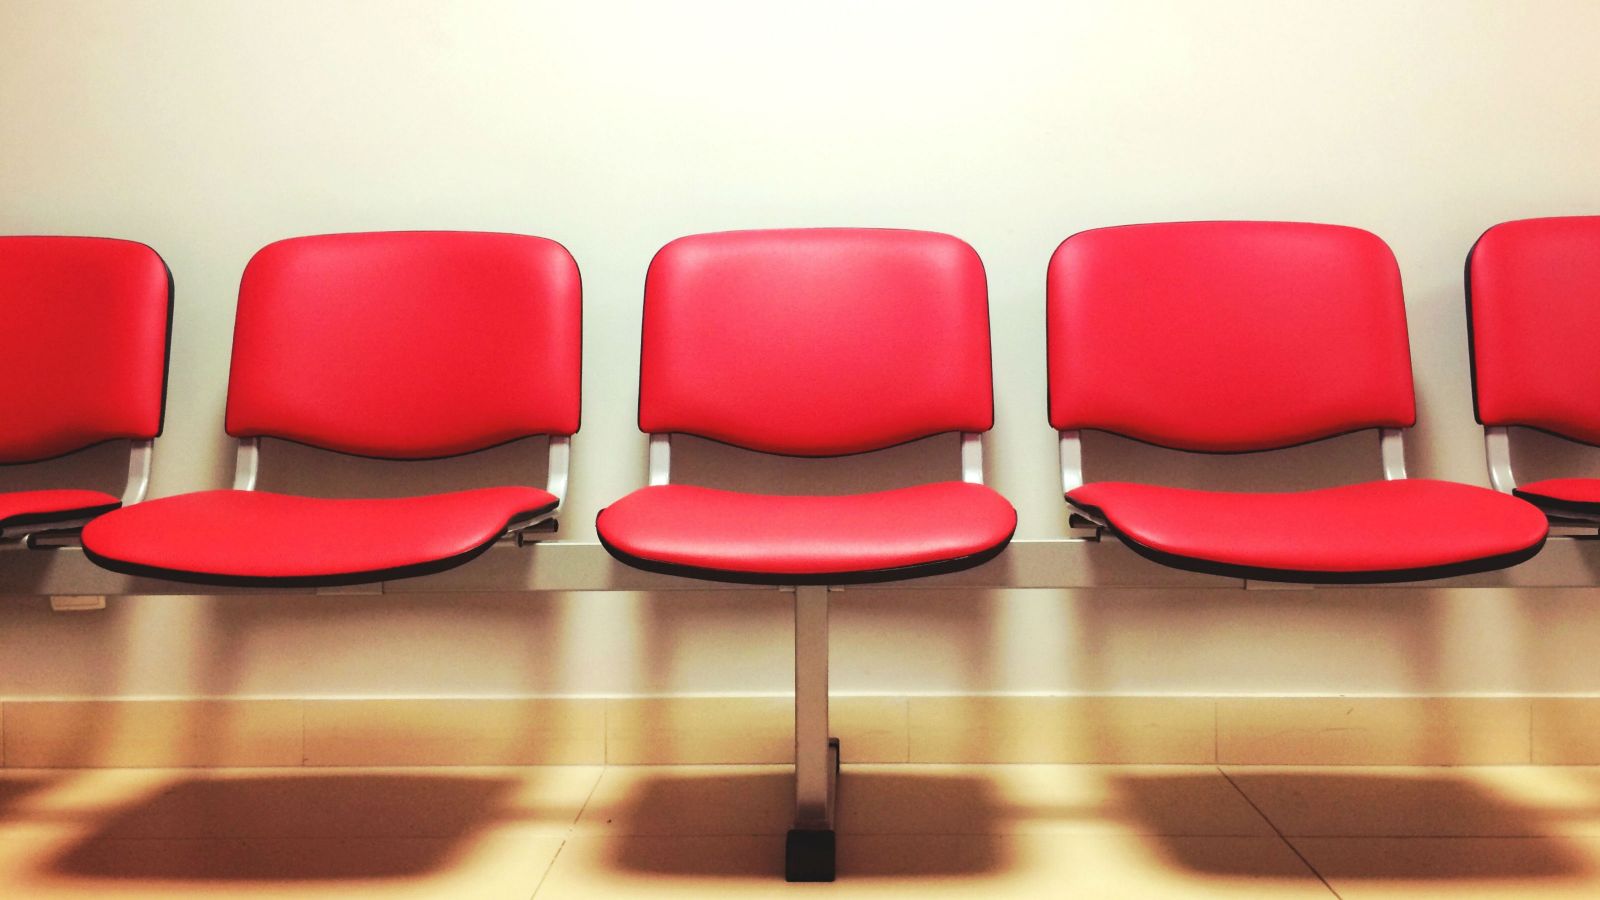 Red chairs in a doctor's waiting room.